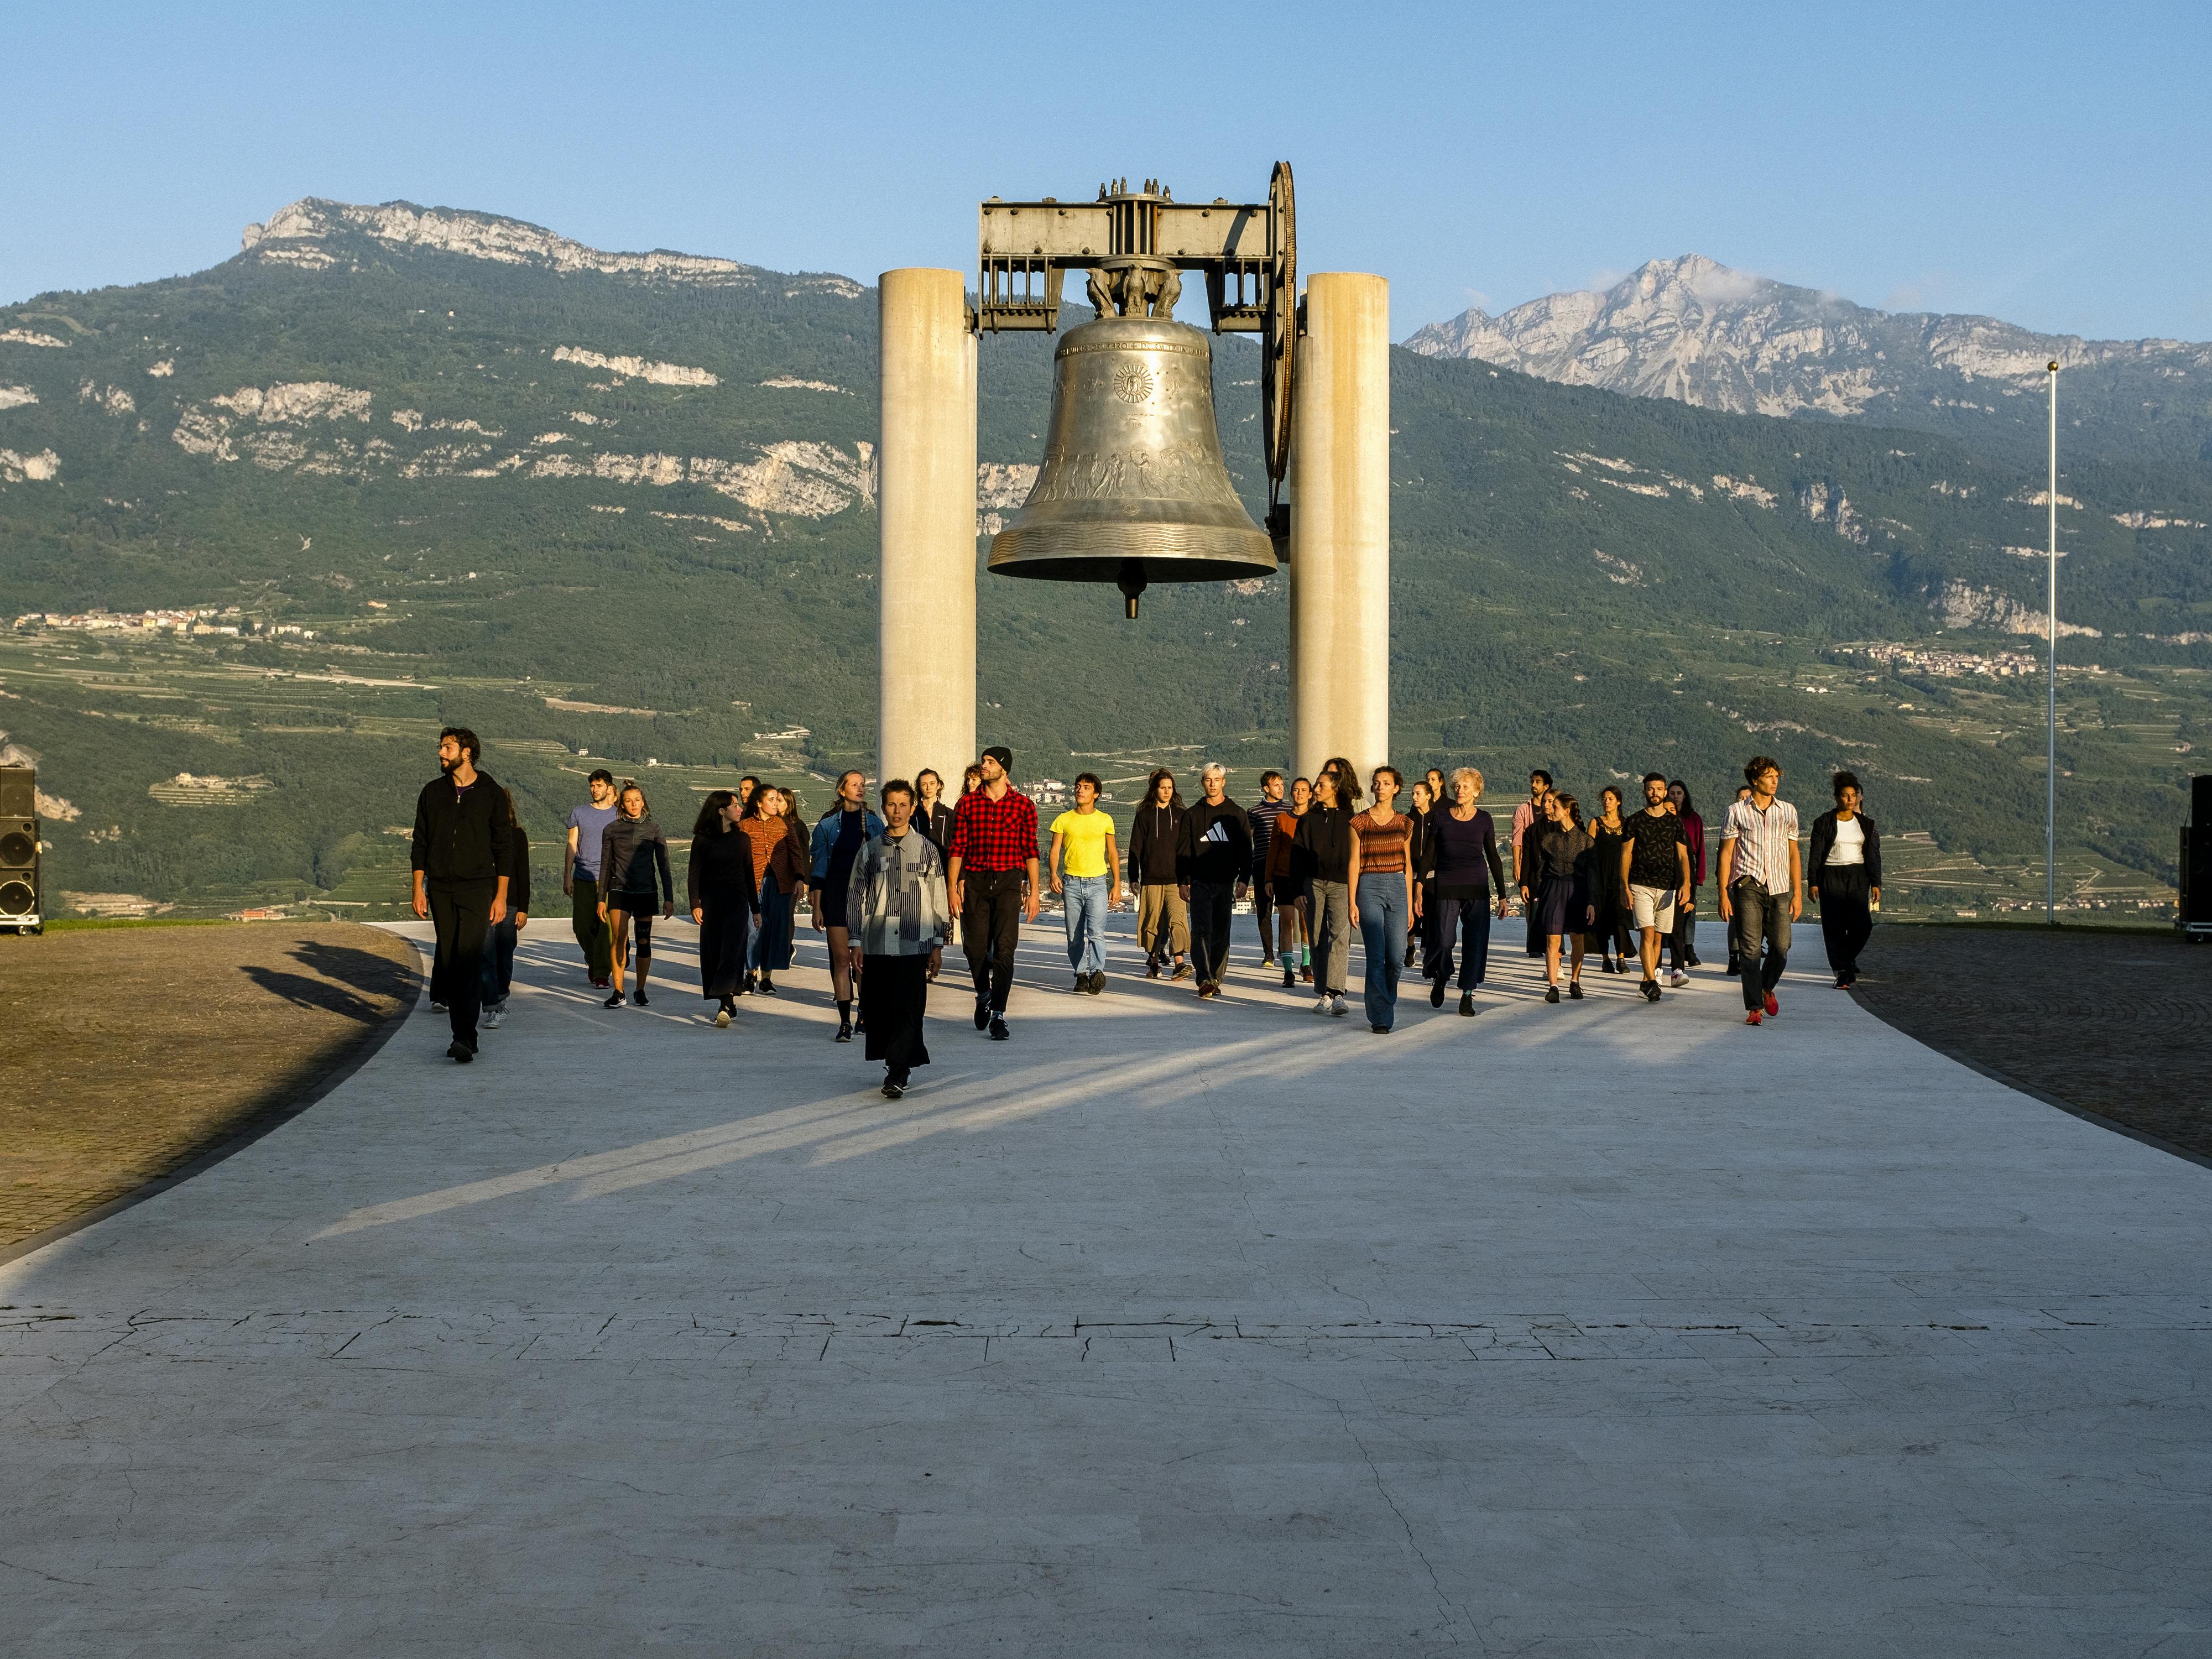 Alessio Maria Romano's performance Choros at the Campana dei Caduti in Rovereto. A large group of performers, in front of the bell, walk towards the camera illuminated by the dawning sun.